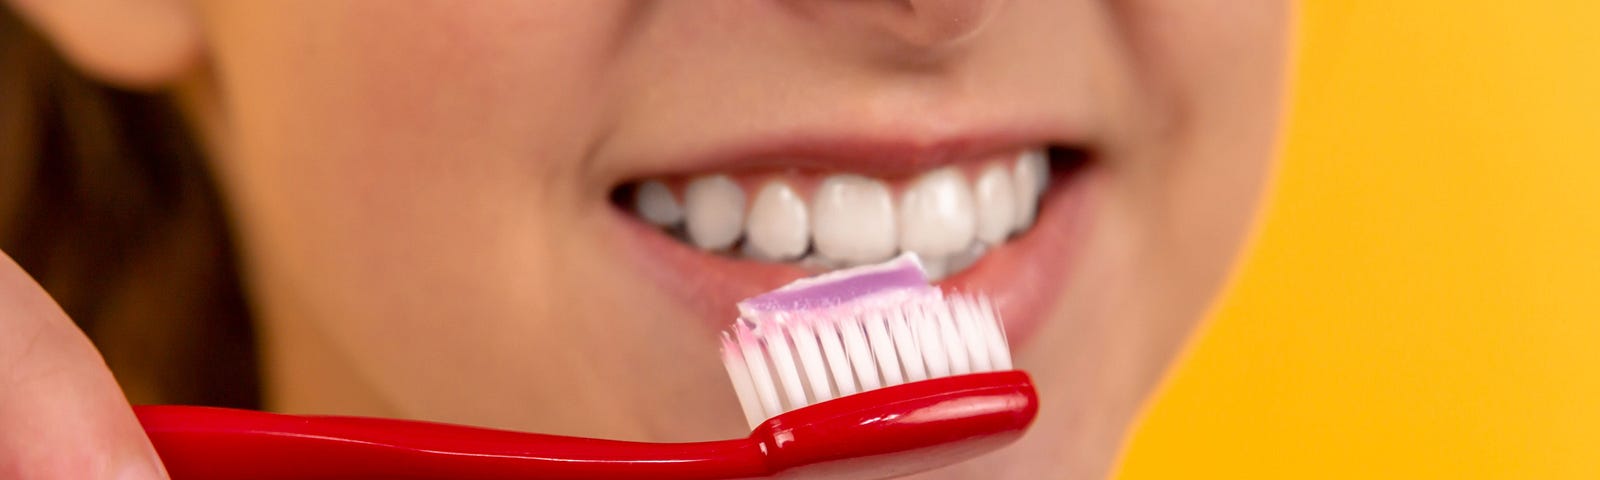 A woman, smiling, holding up a toothbrush to her mouth.